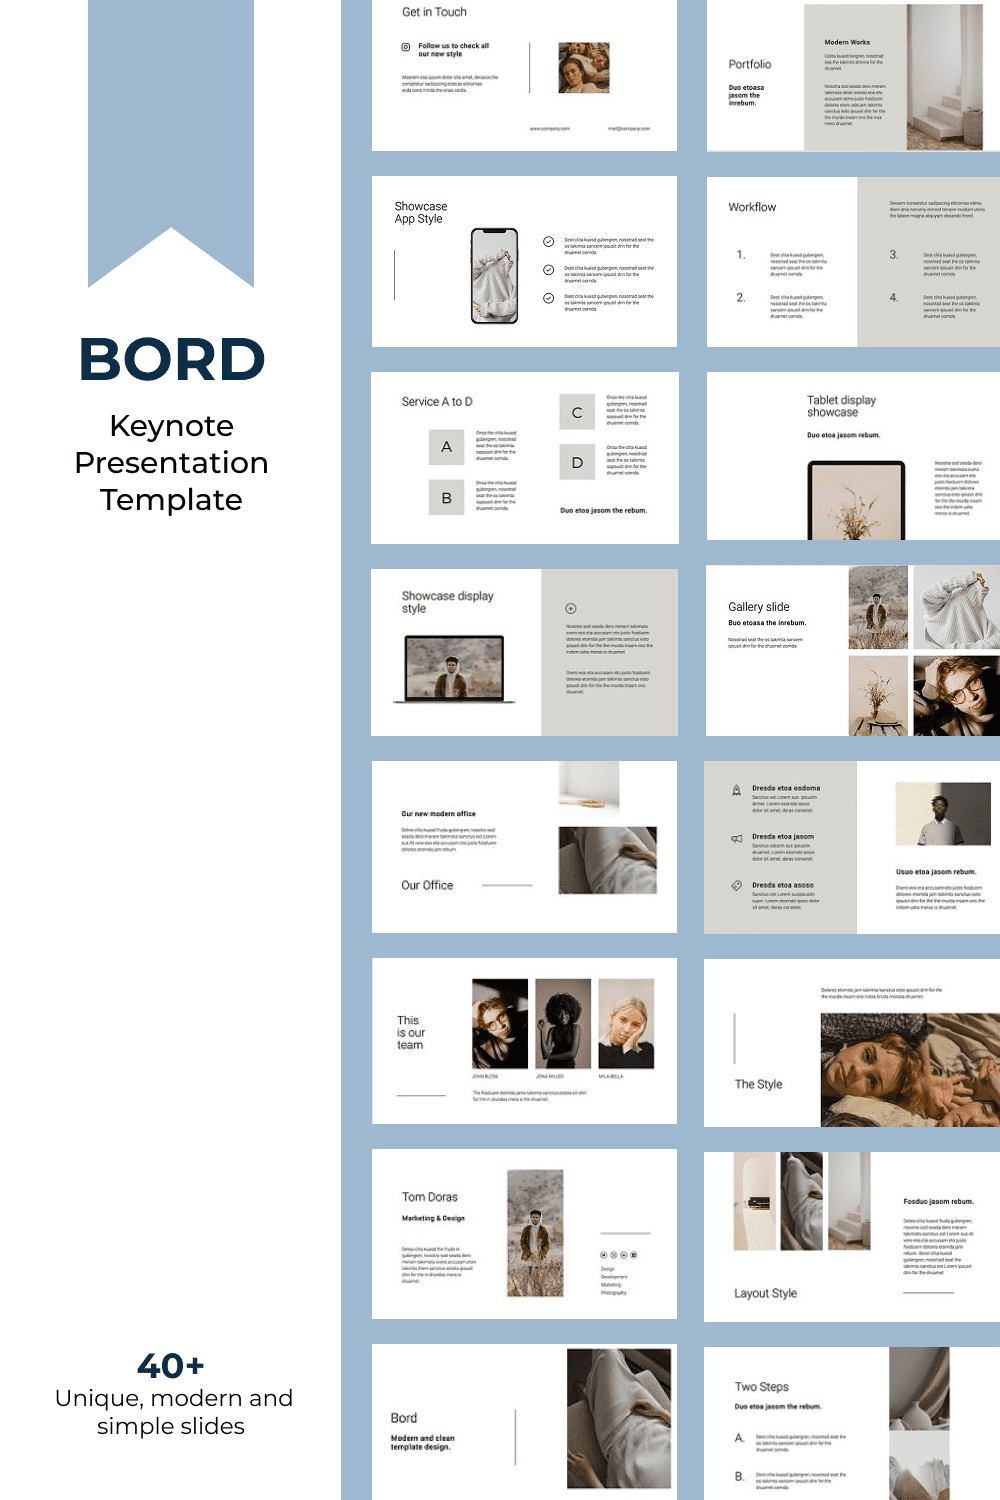 Collage of BORD presentation pages with white background and gray graphics.